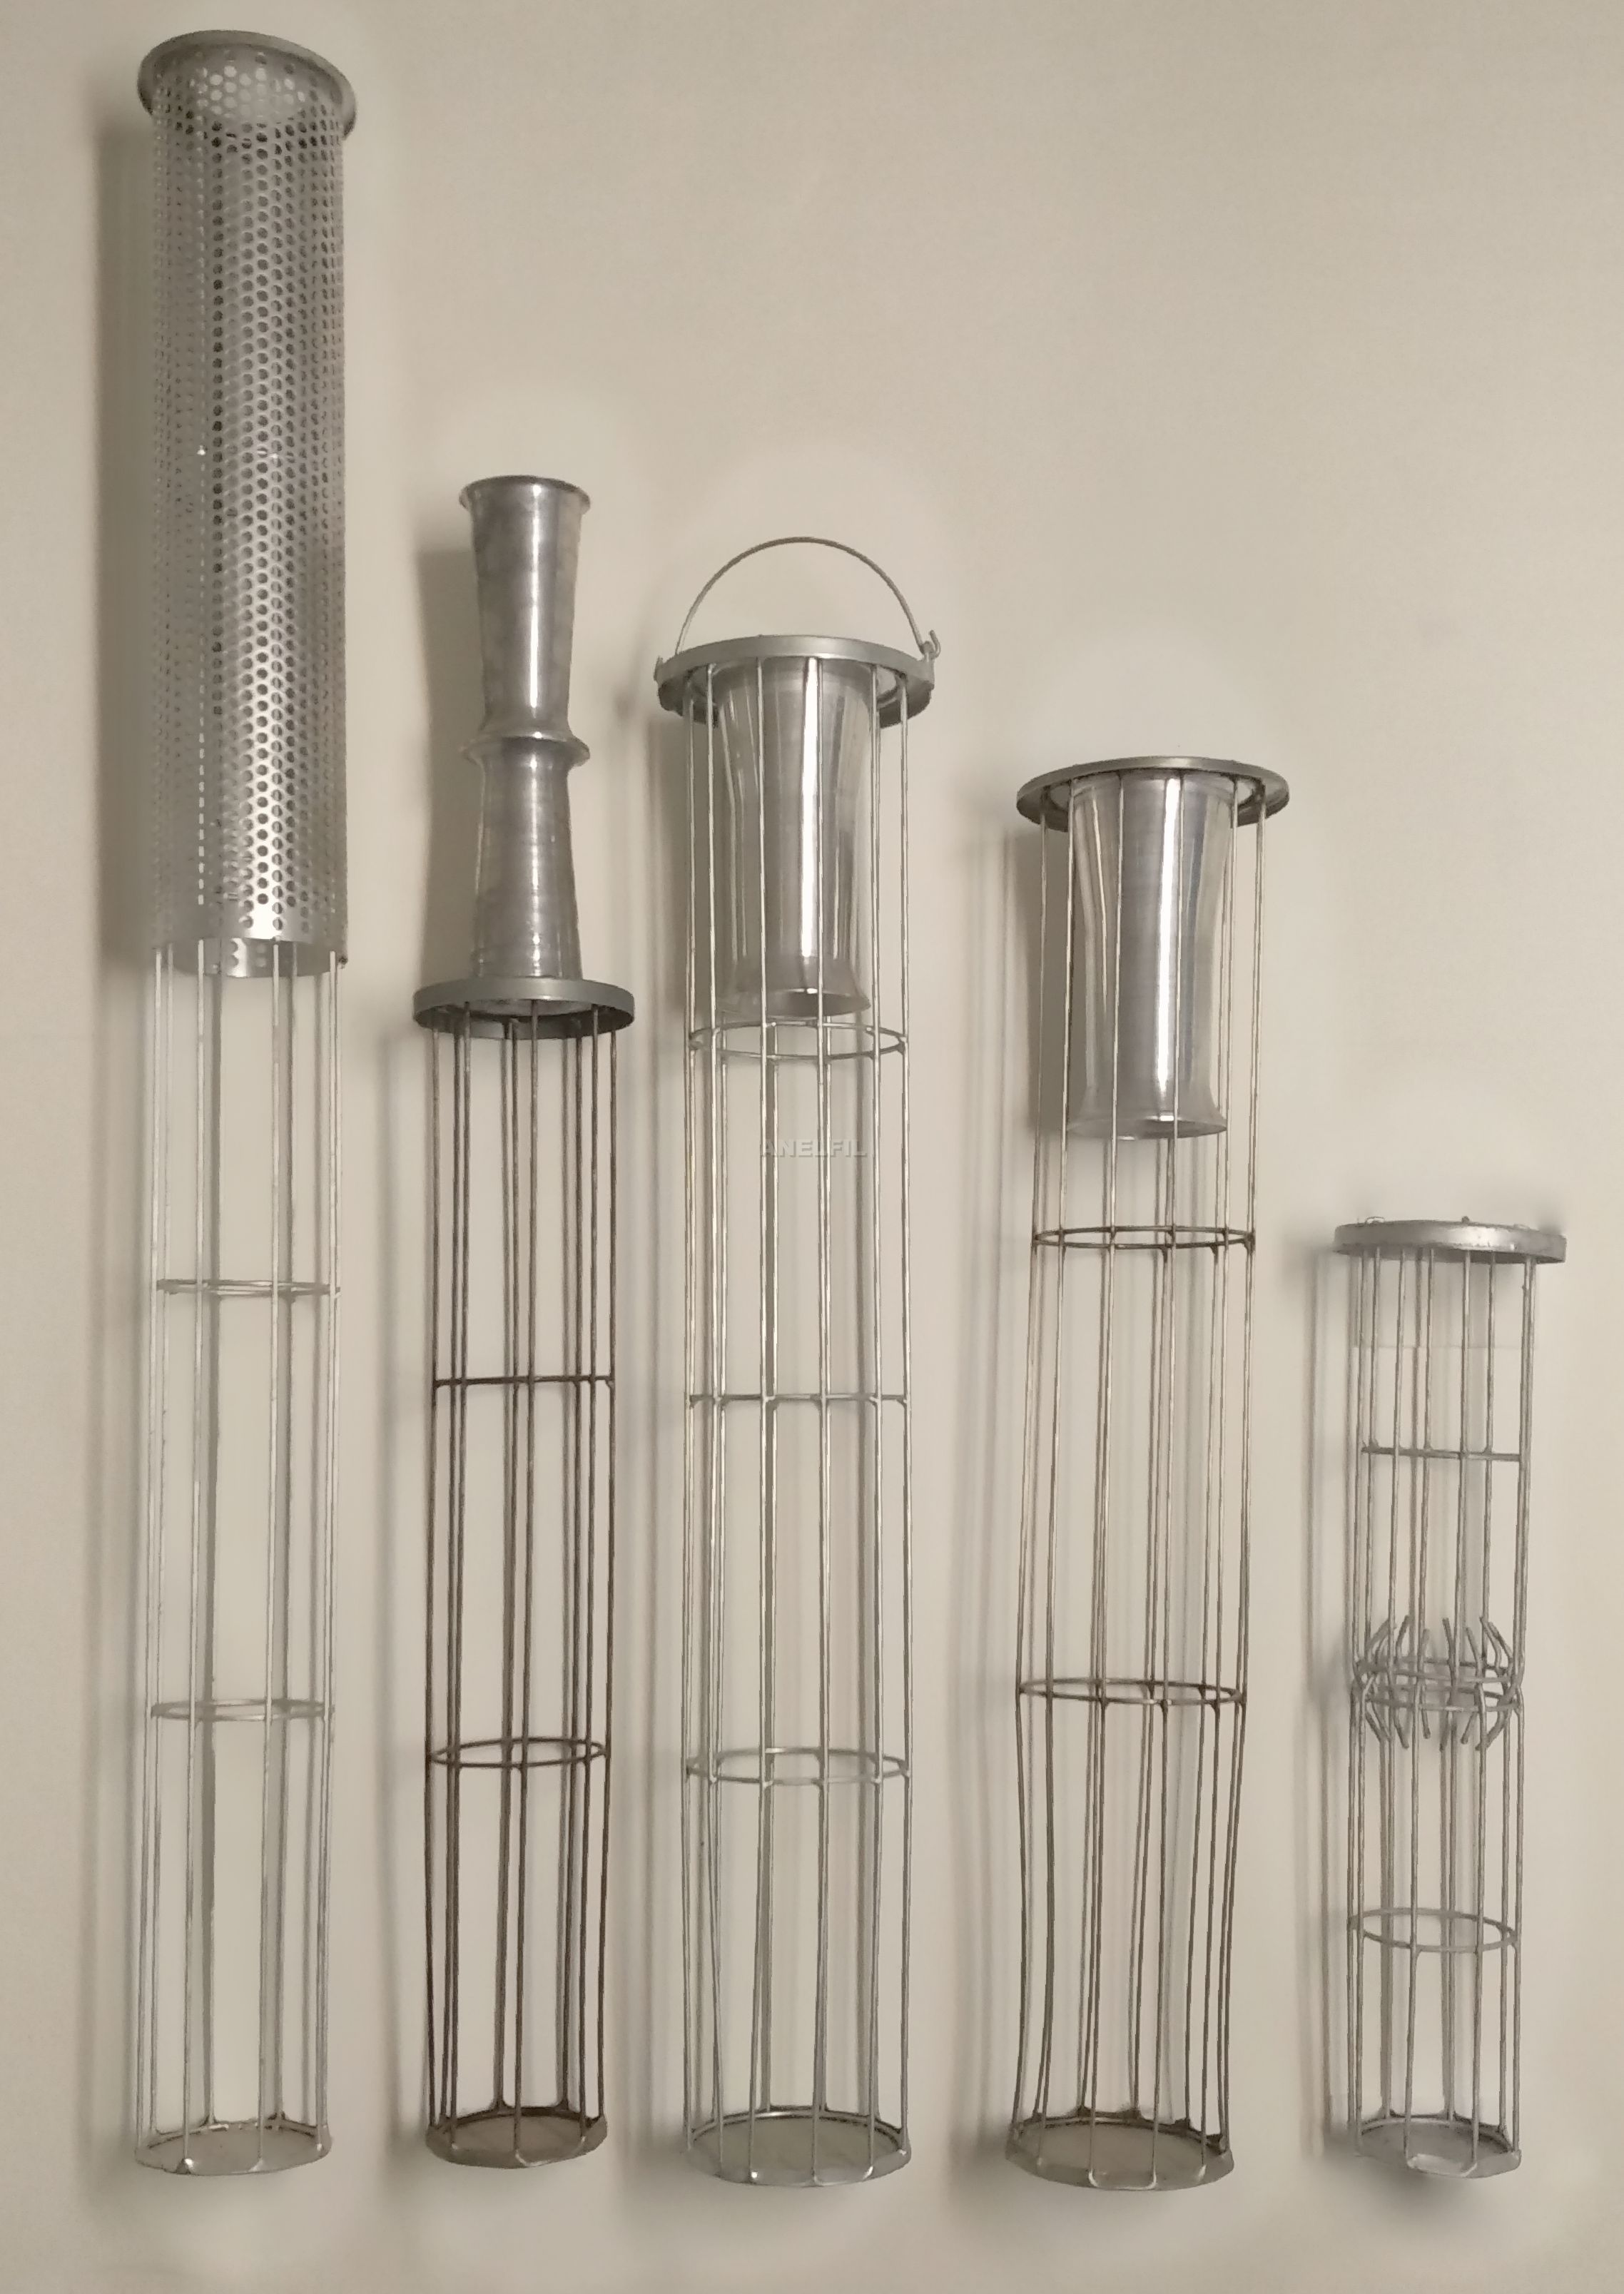 Cage with perforated metal sheet, Cage with iron sheeted "neck", Cage with aluminium-made venturis and lid, 2-part wire cage